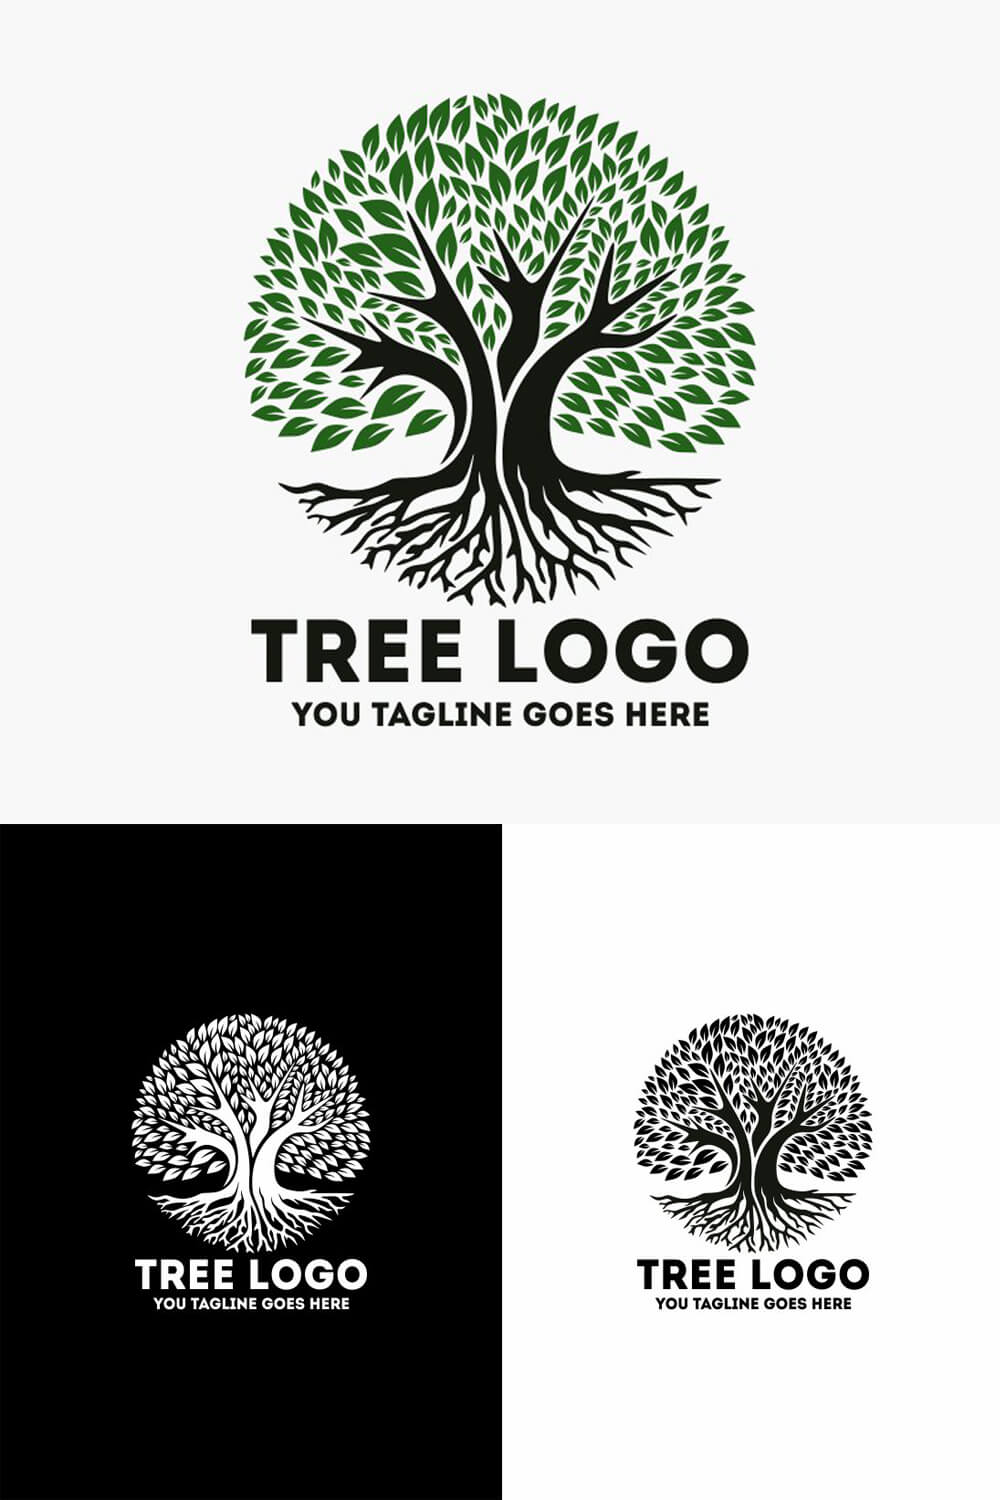 Inscription "Tree logo" on the white and black backgrounds.